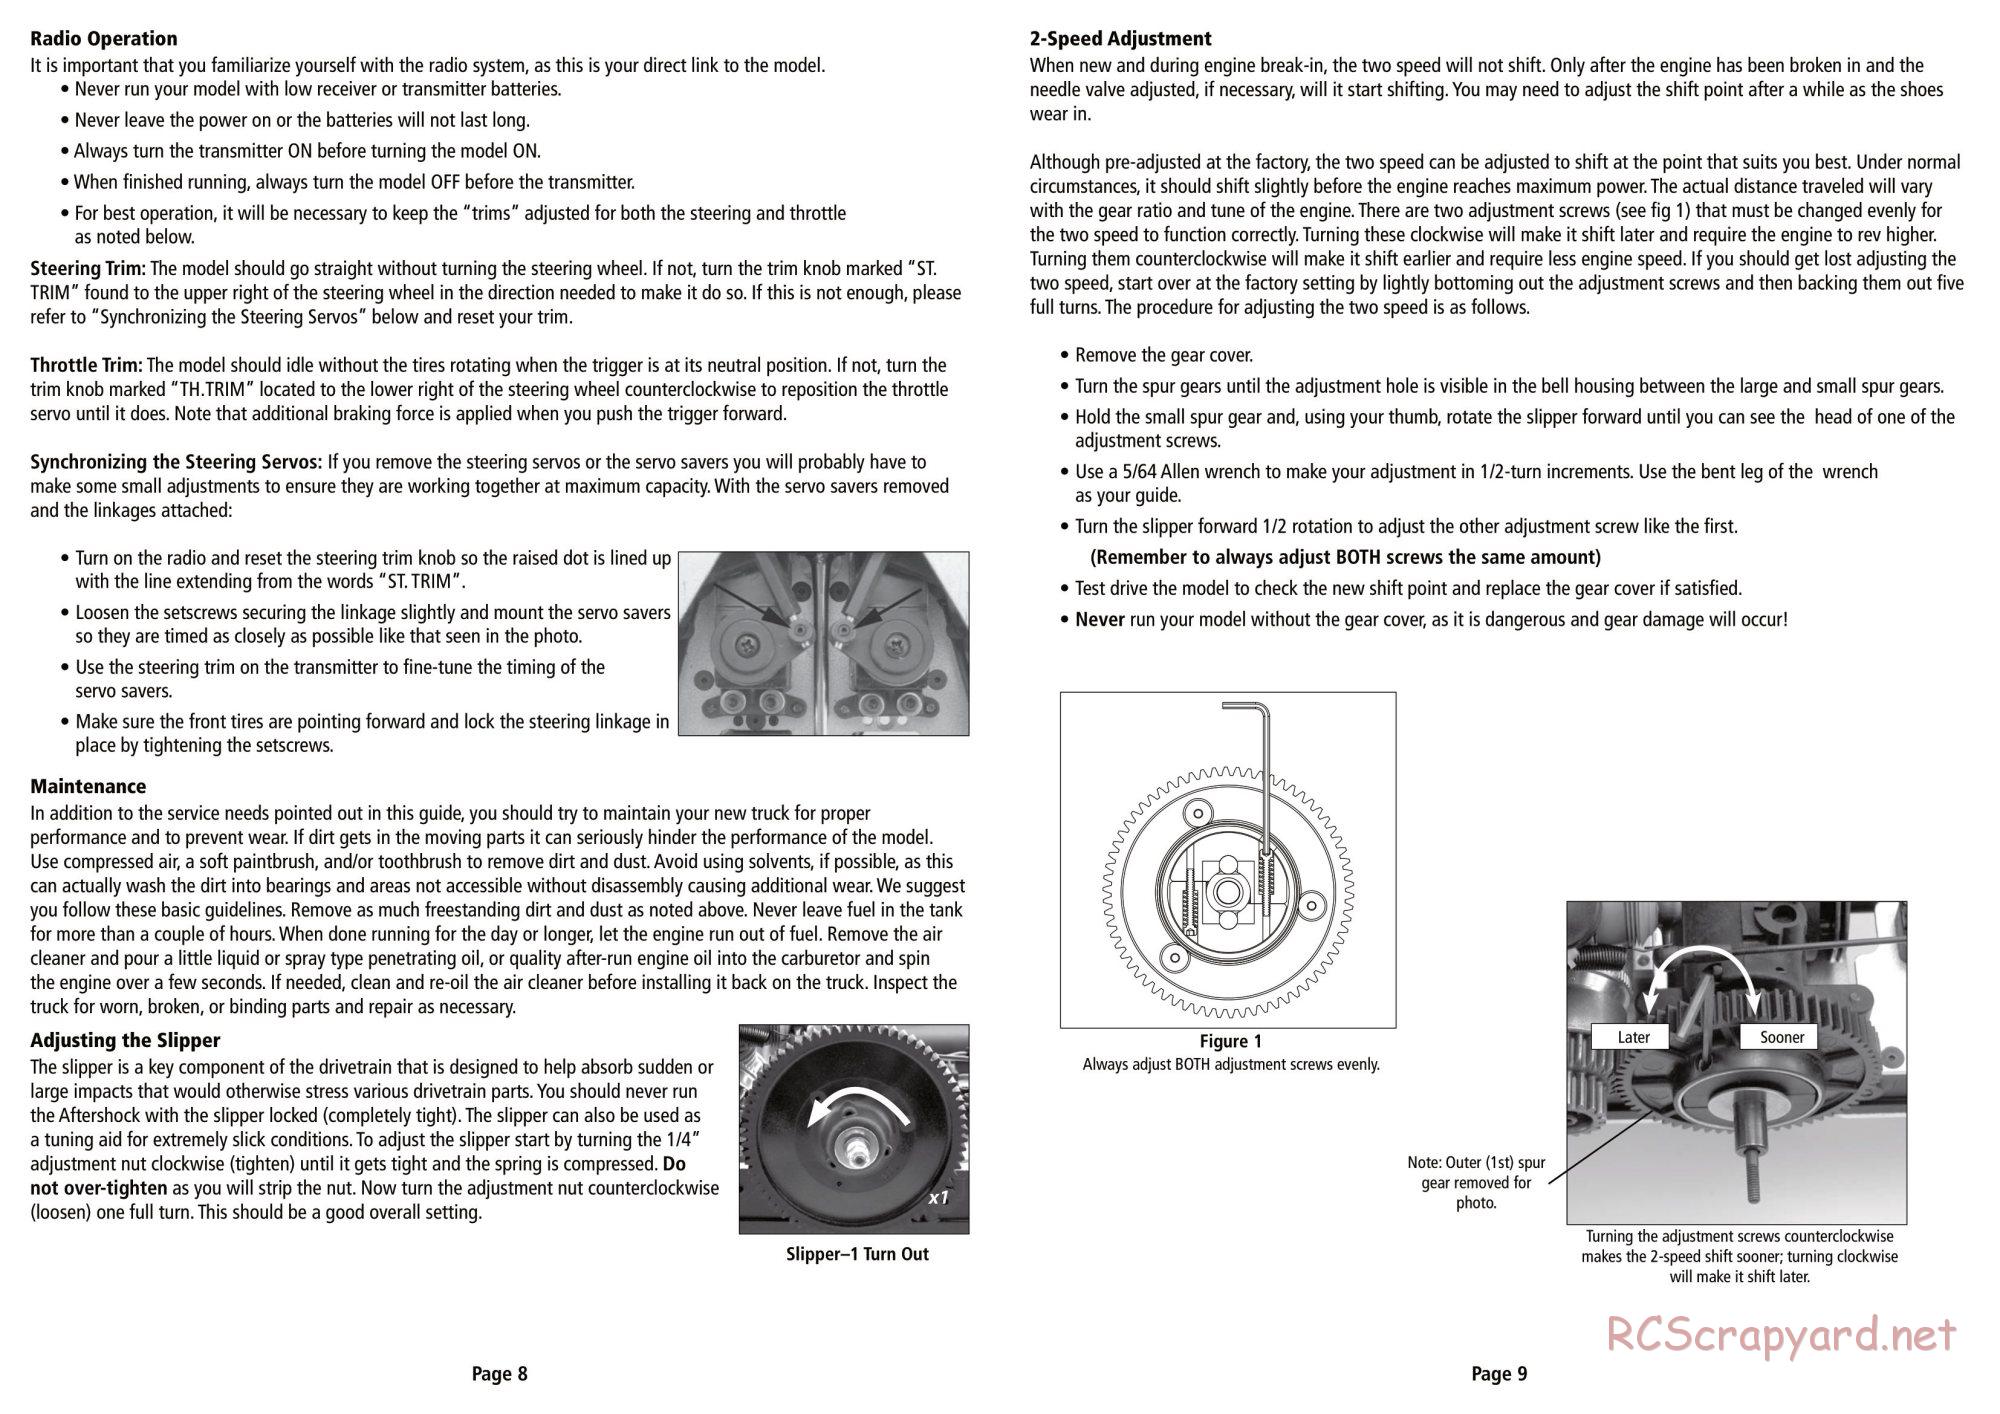 Team Losi - Limited Edition Aftershock - Manual - Page 5